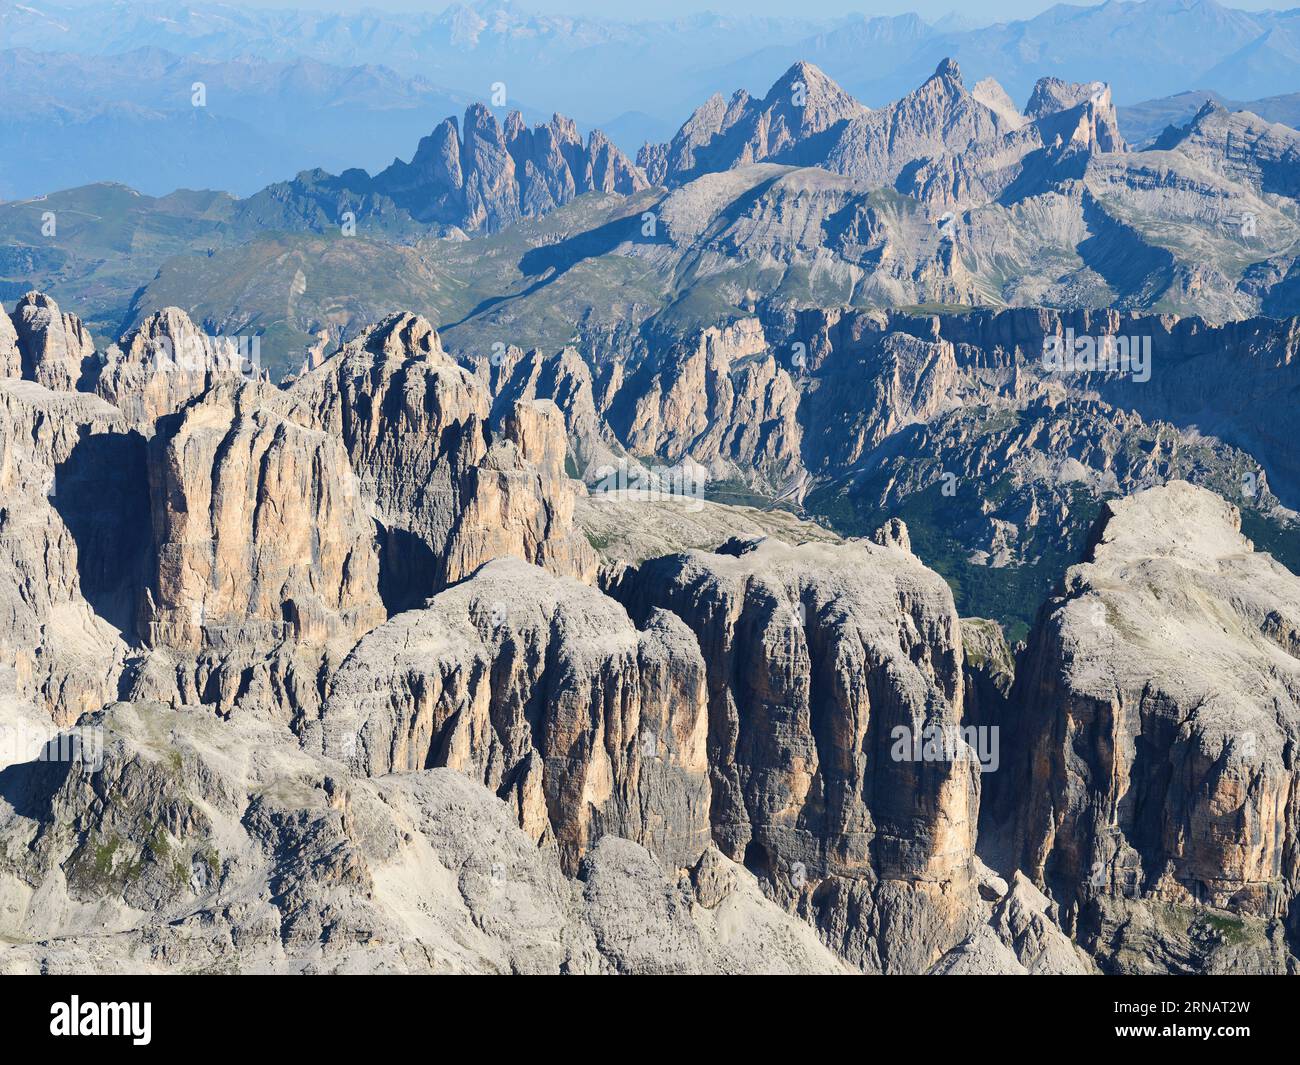 AERIAL VIEW. The incredibly jagged landscape of the Sella Massif with the Puez-Geisler Nature Park in the distance. Dolomites, Italy. Stock Photo